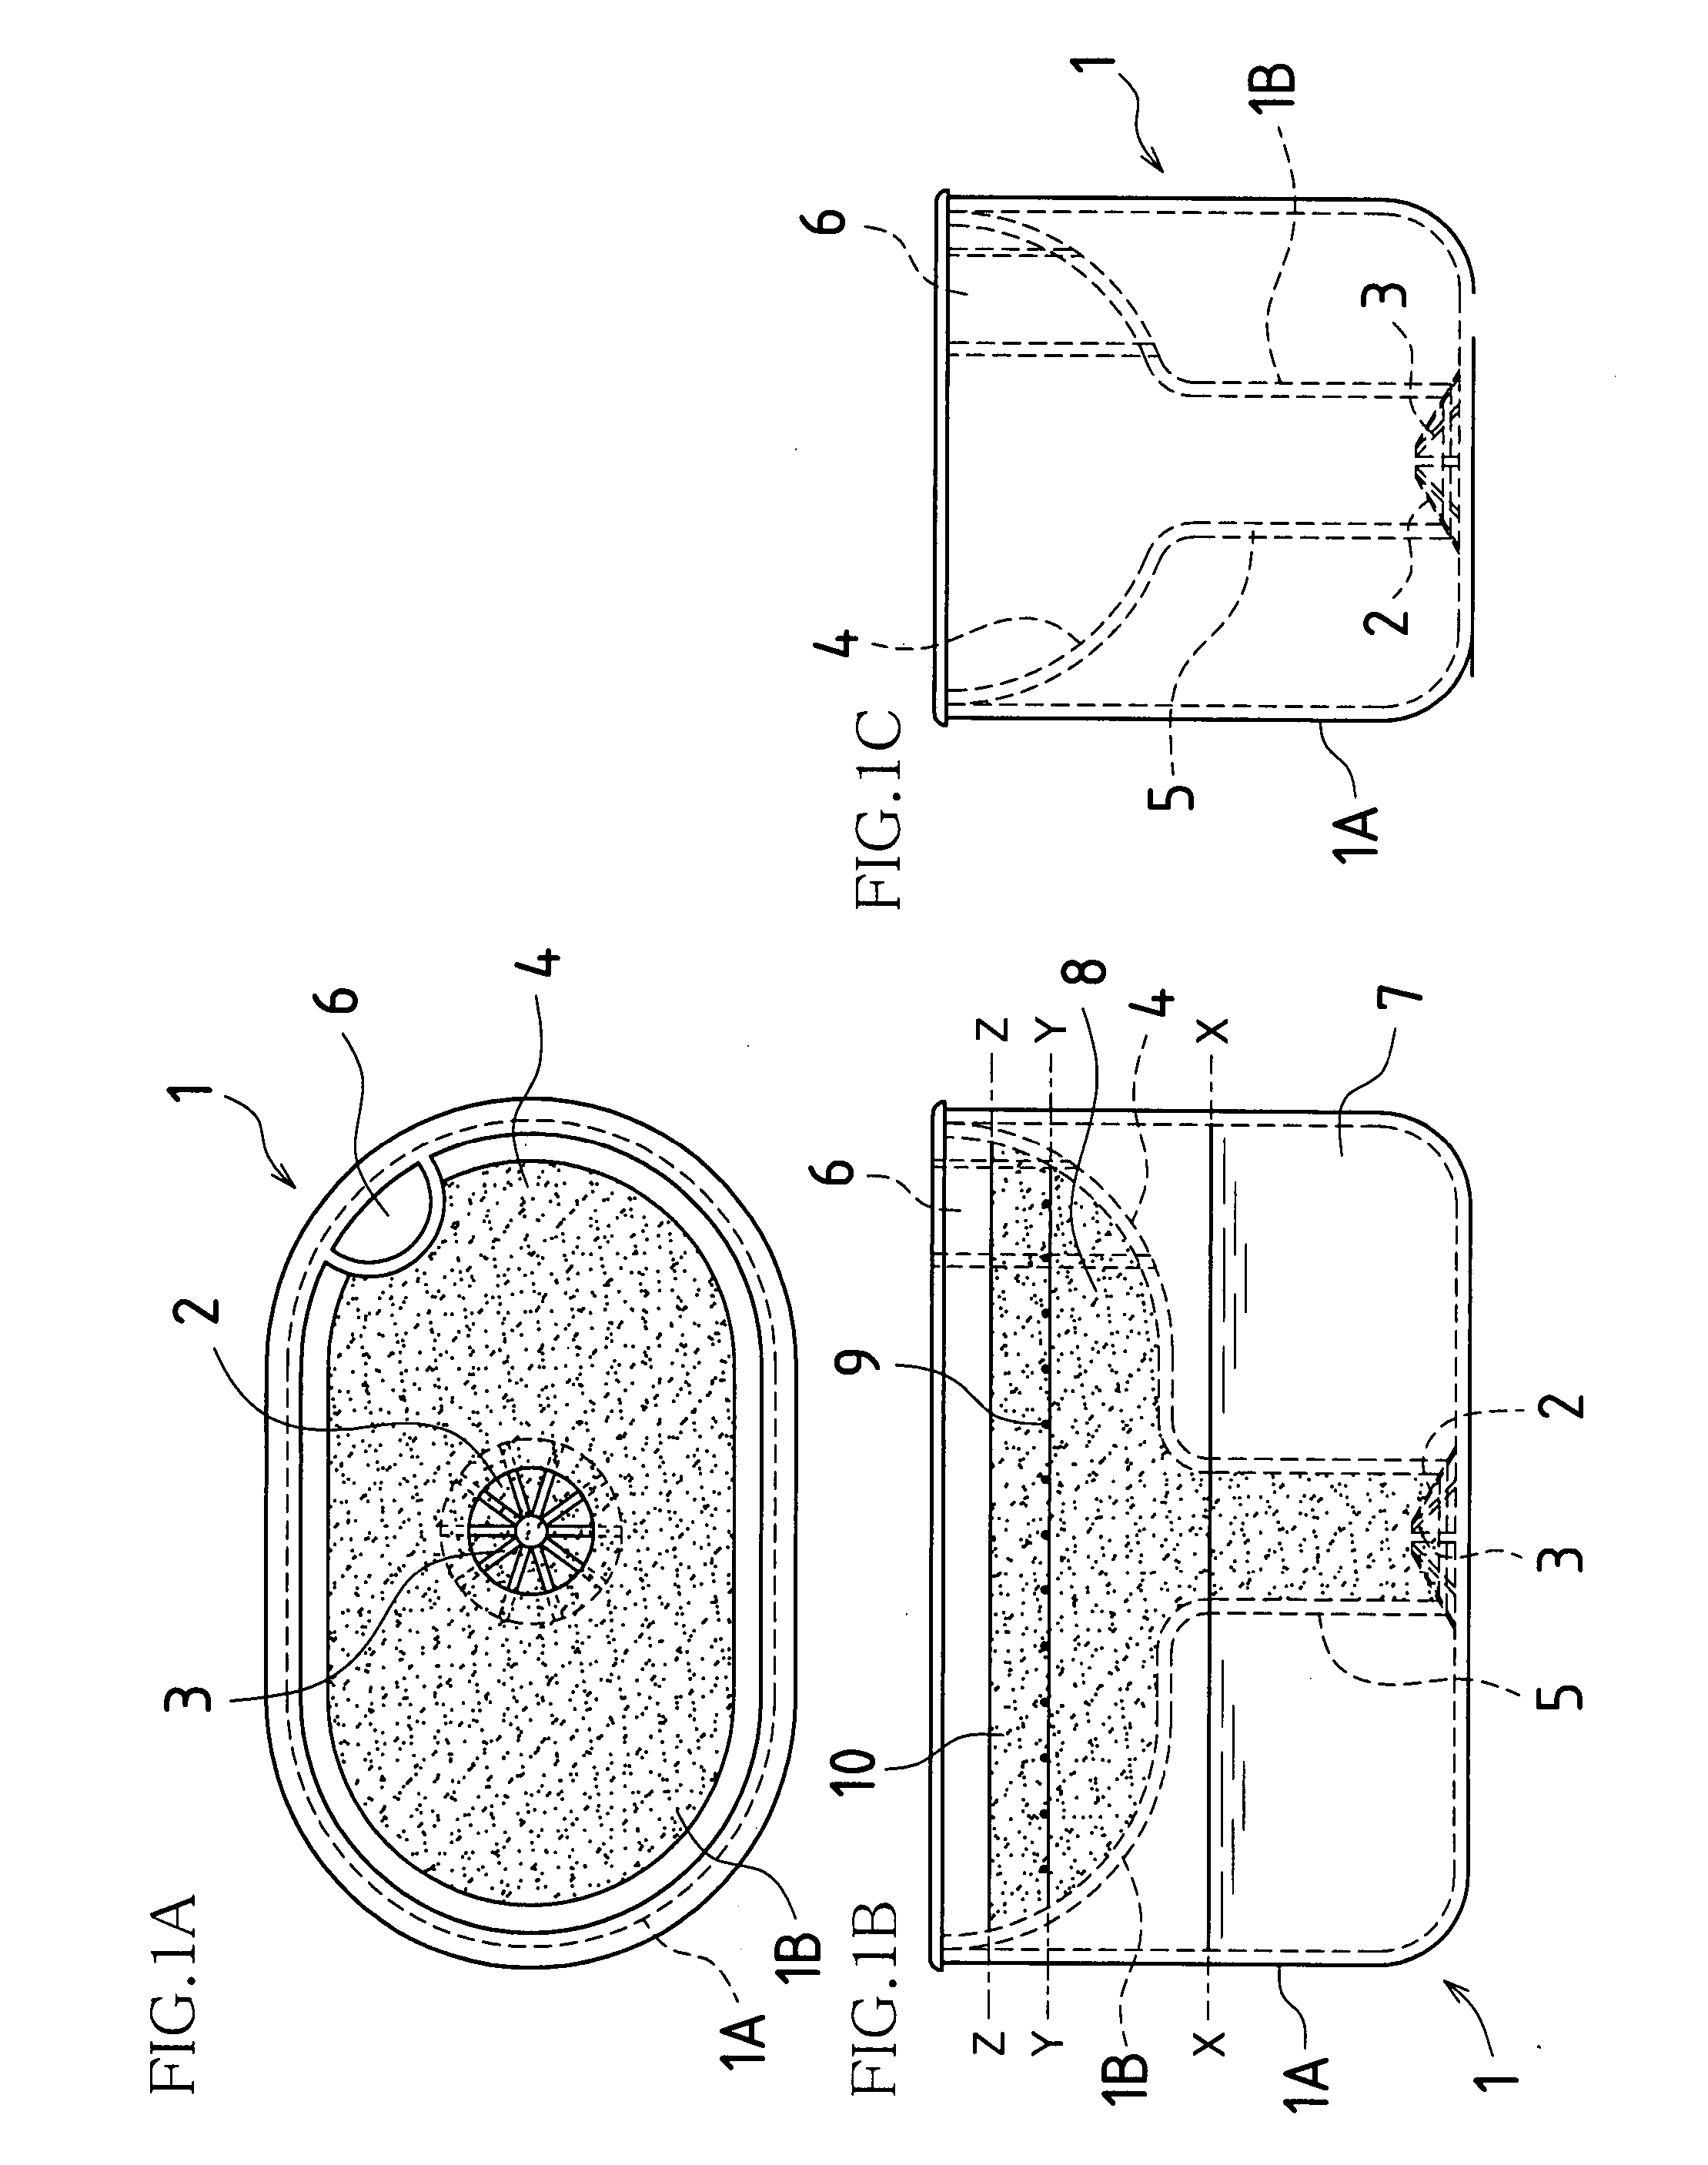 Method for hydroponic plant culture and container for same